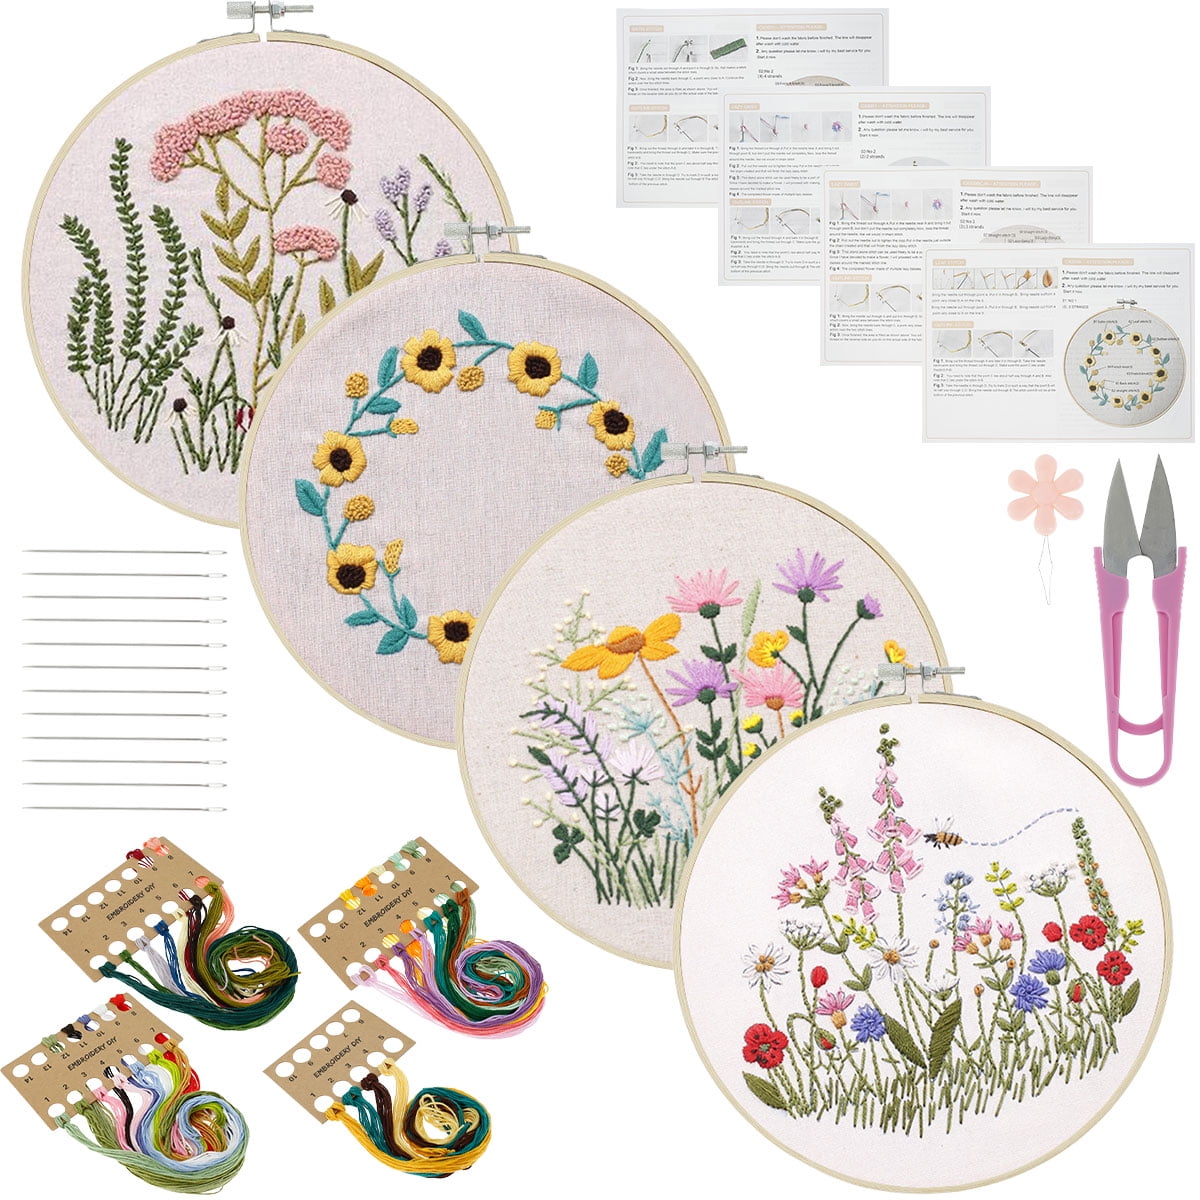 SESAVER Embroidery Starter Kit Hand-made Cross Stitch Kit with